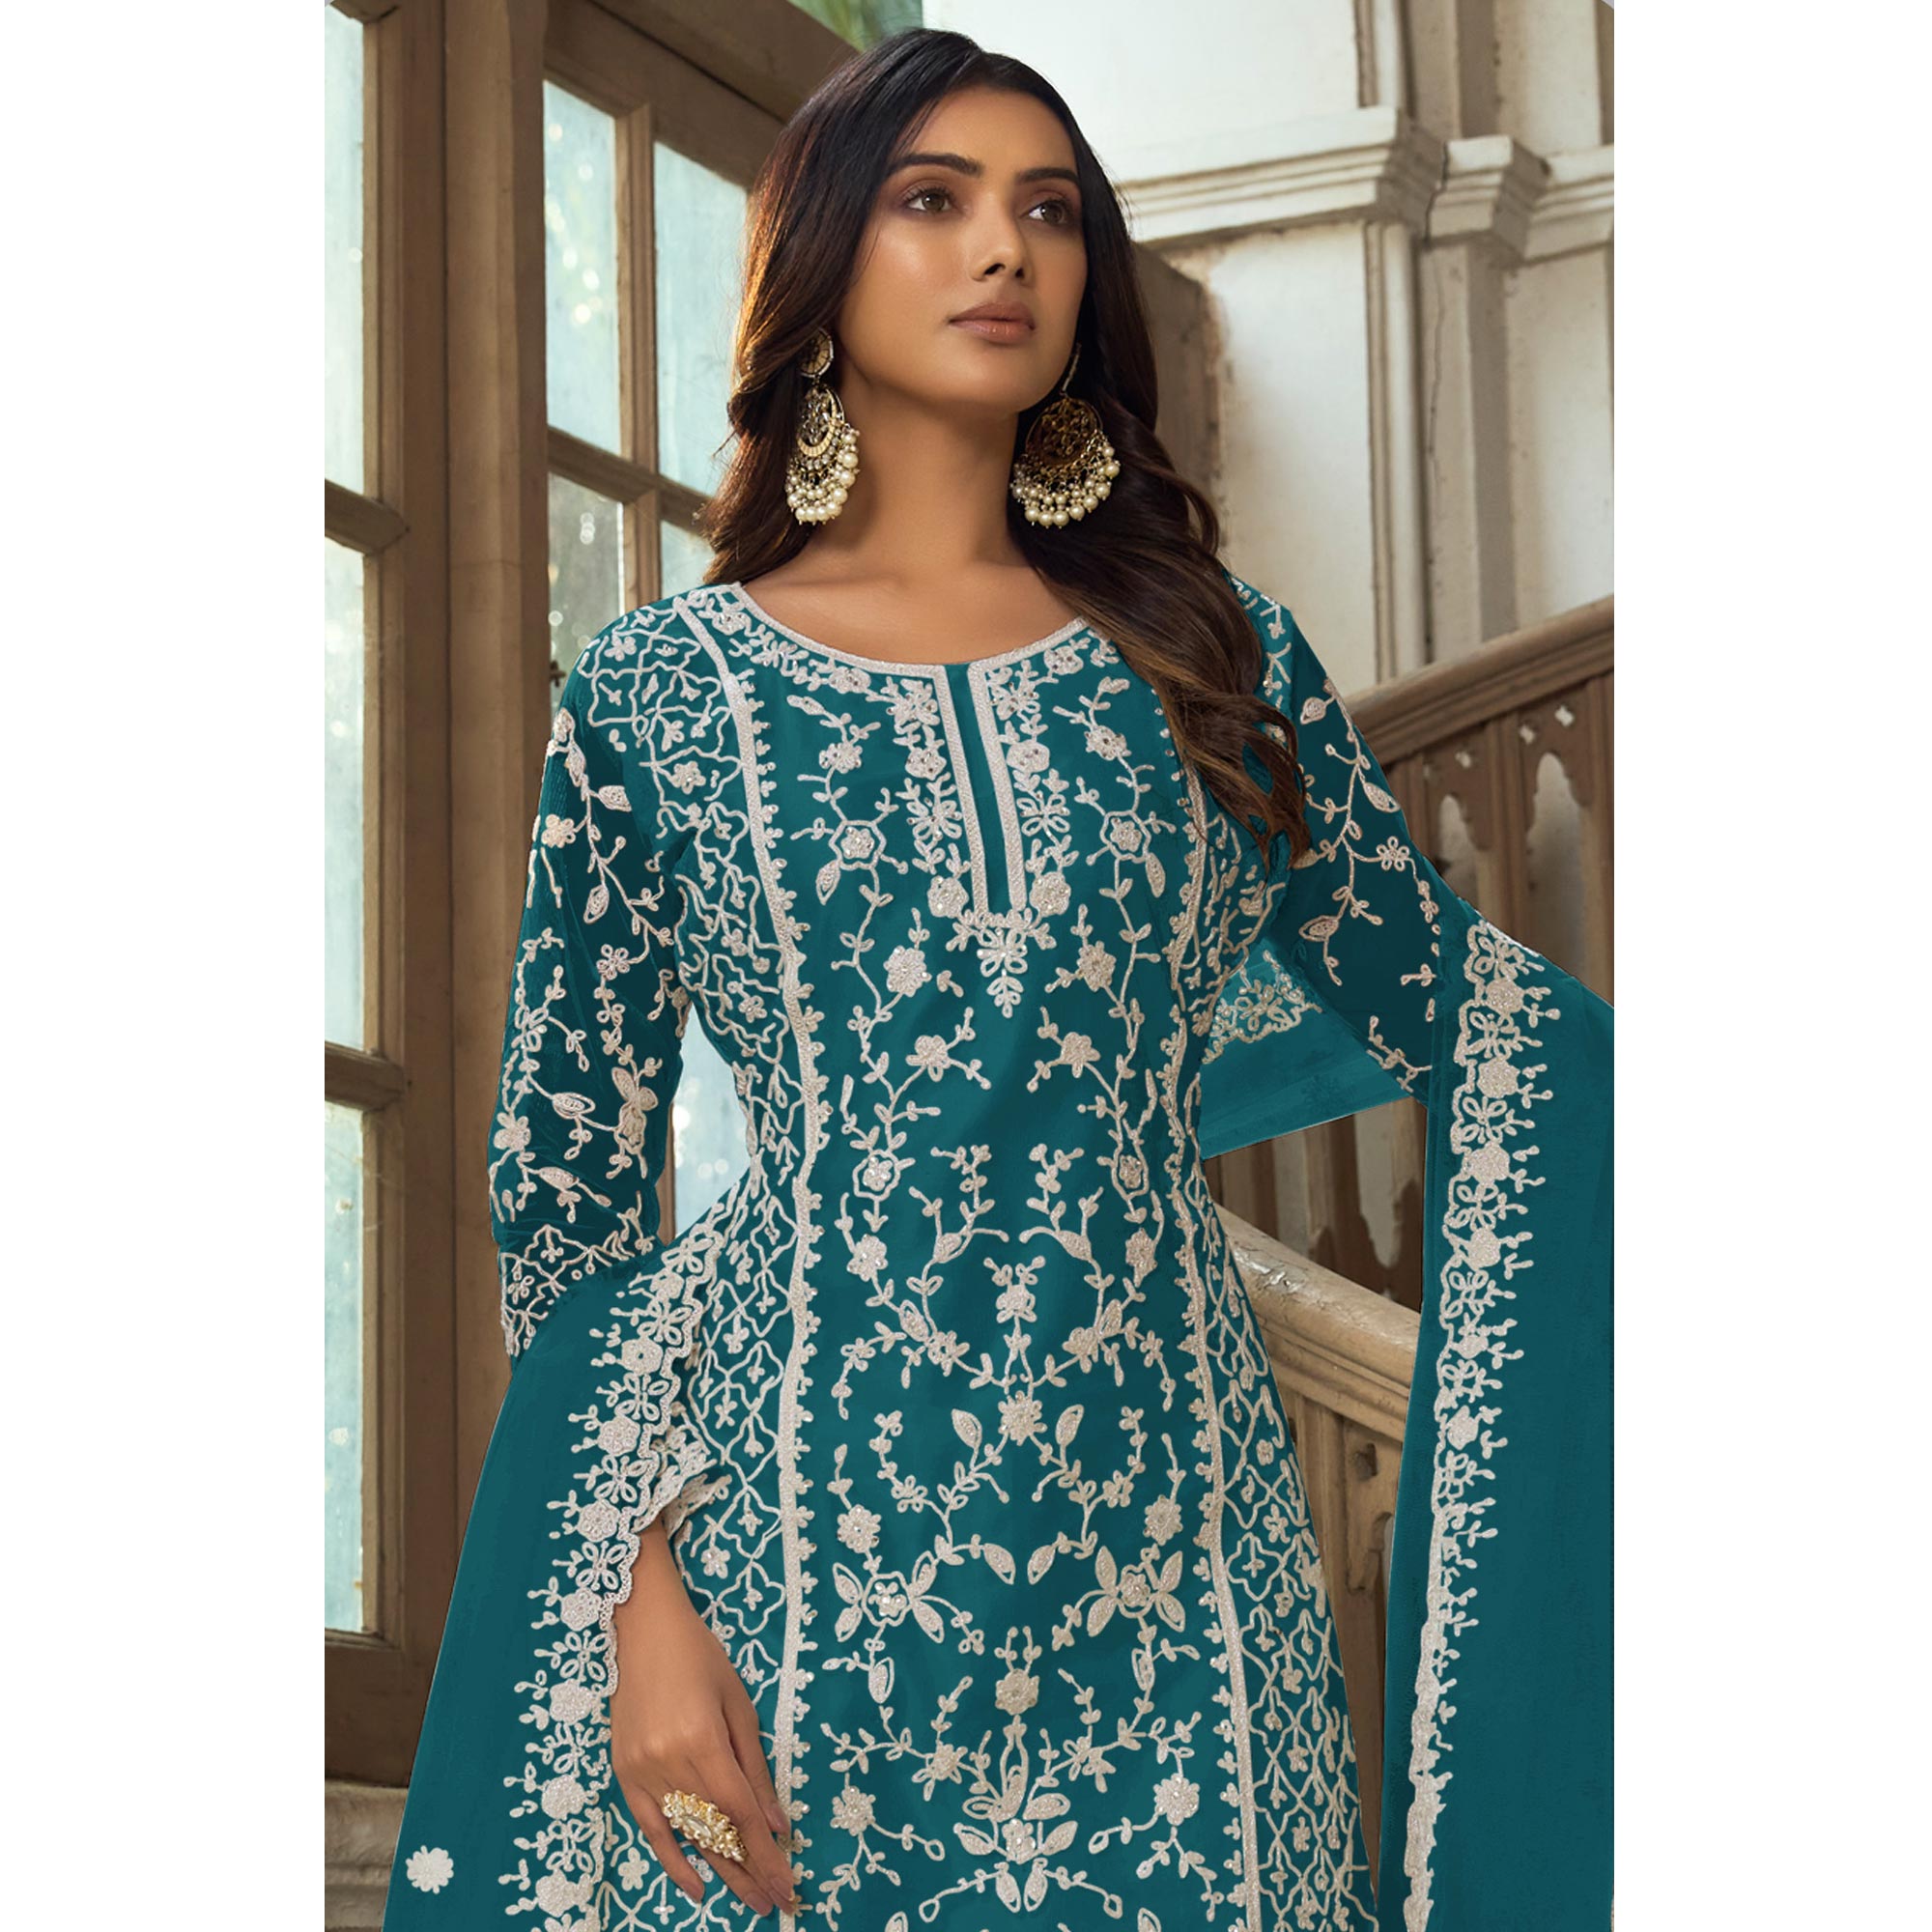 Morpich Floral Embroidered Net Semi Stitched Suit